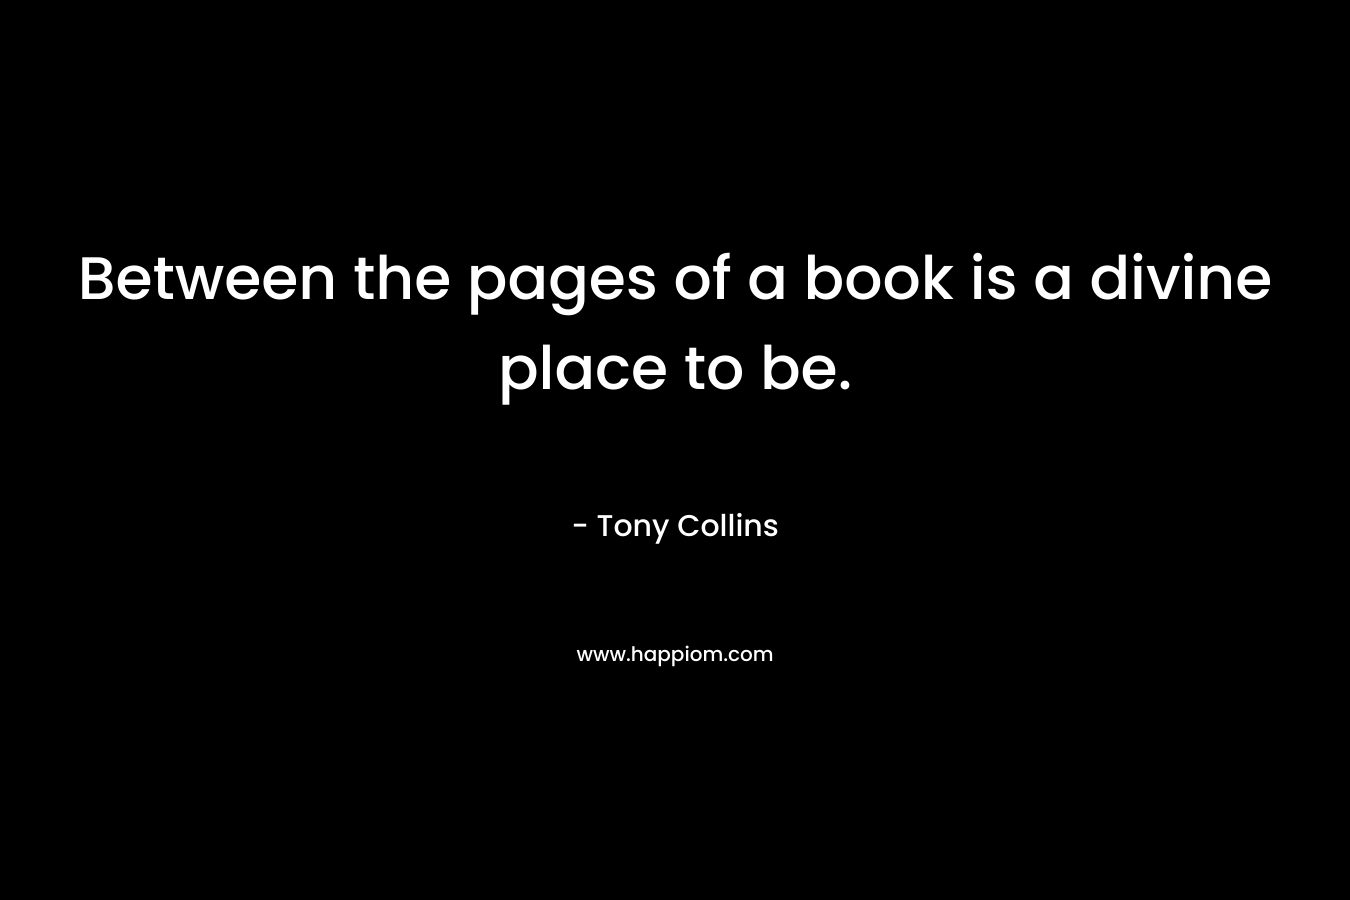 Between the pages of a book is a divine place to be.